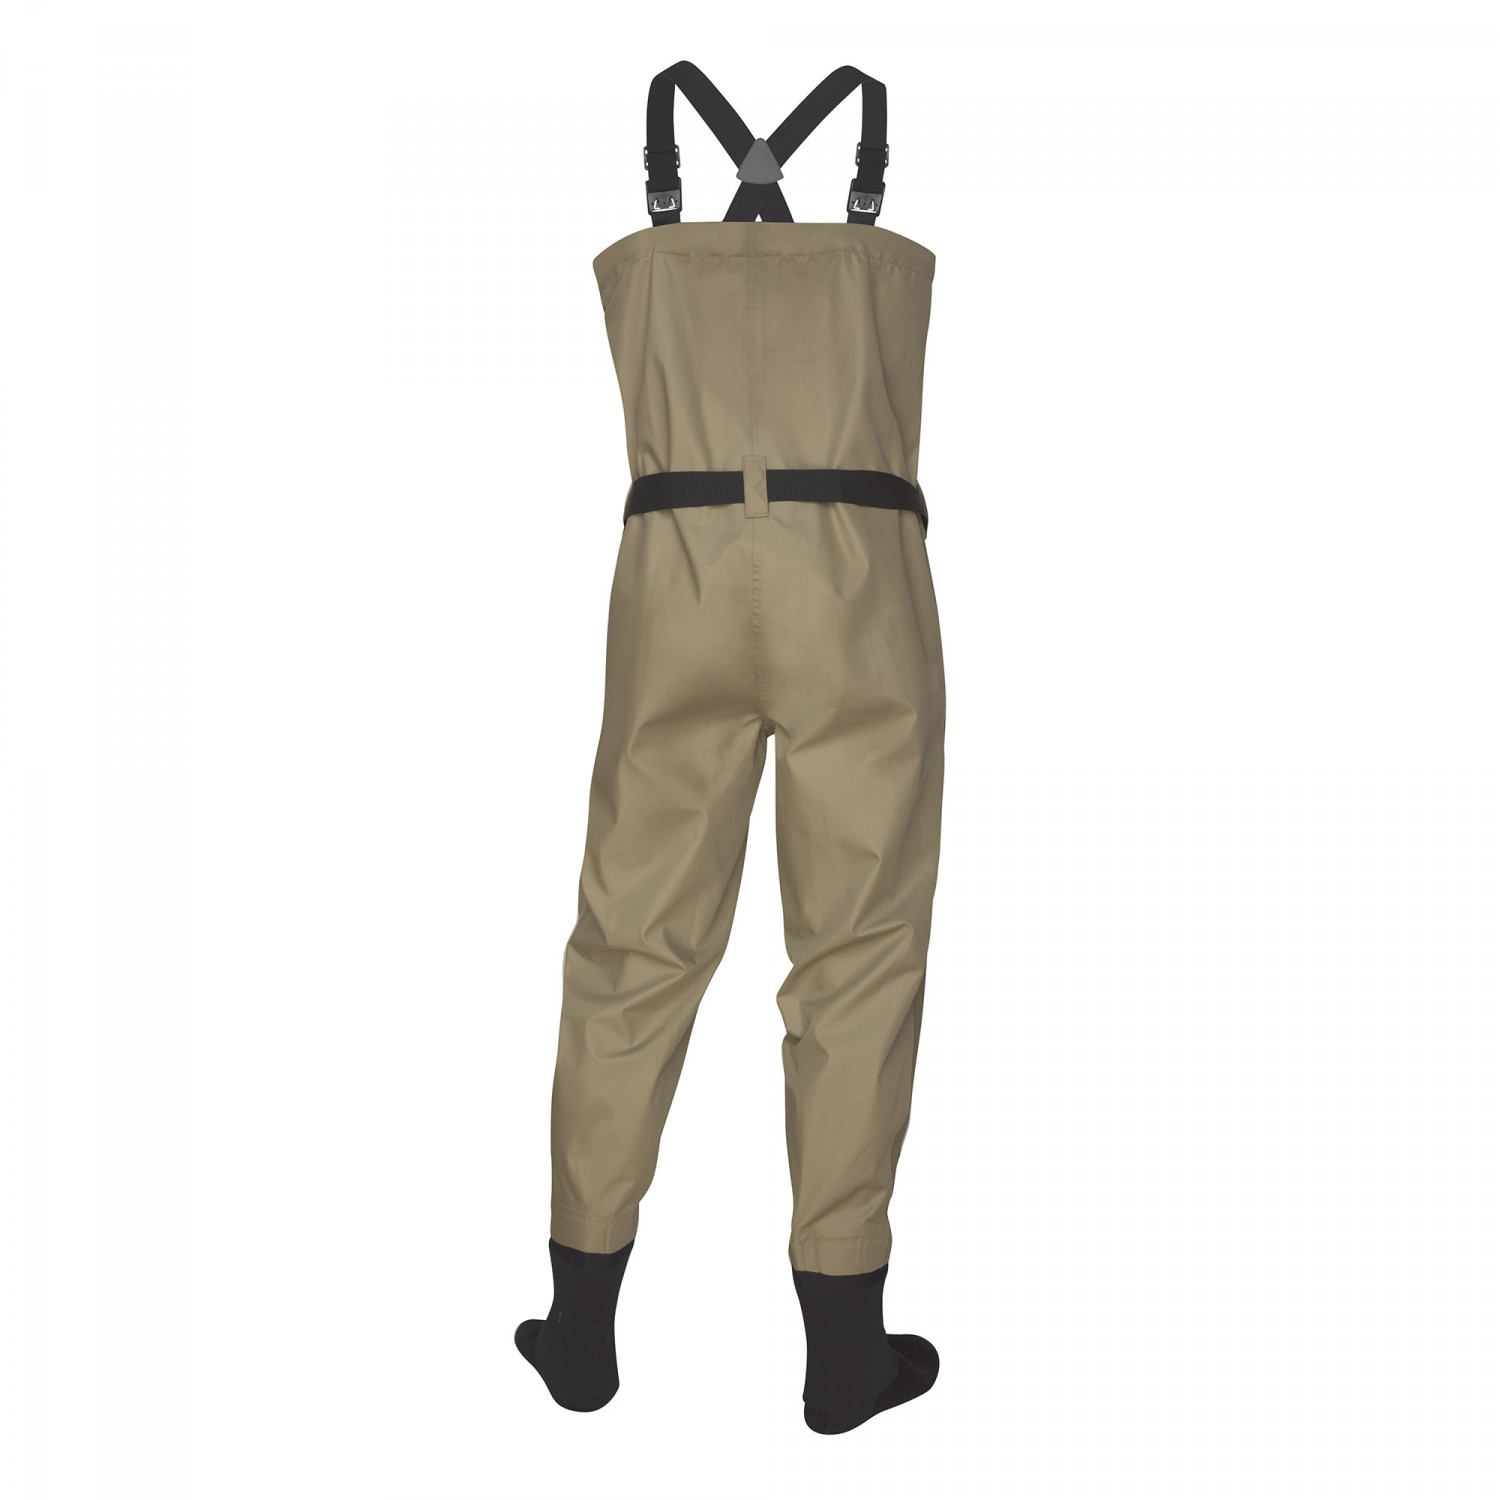 Kids Waders Rain Pants With Zipper Pocket Youth Fishing Waders For